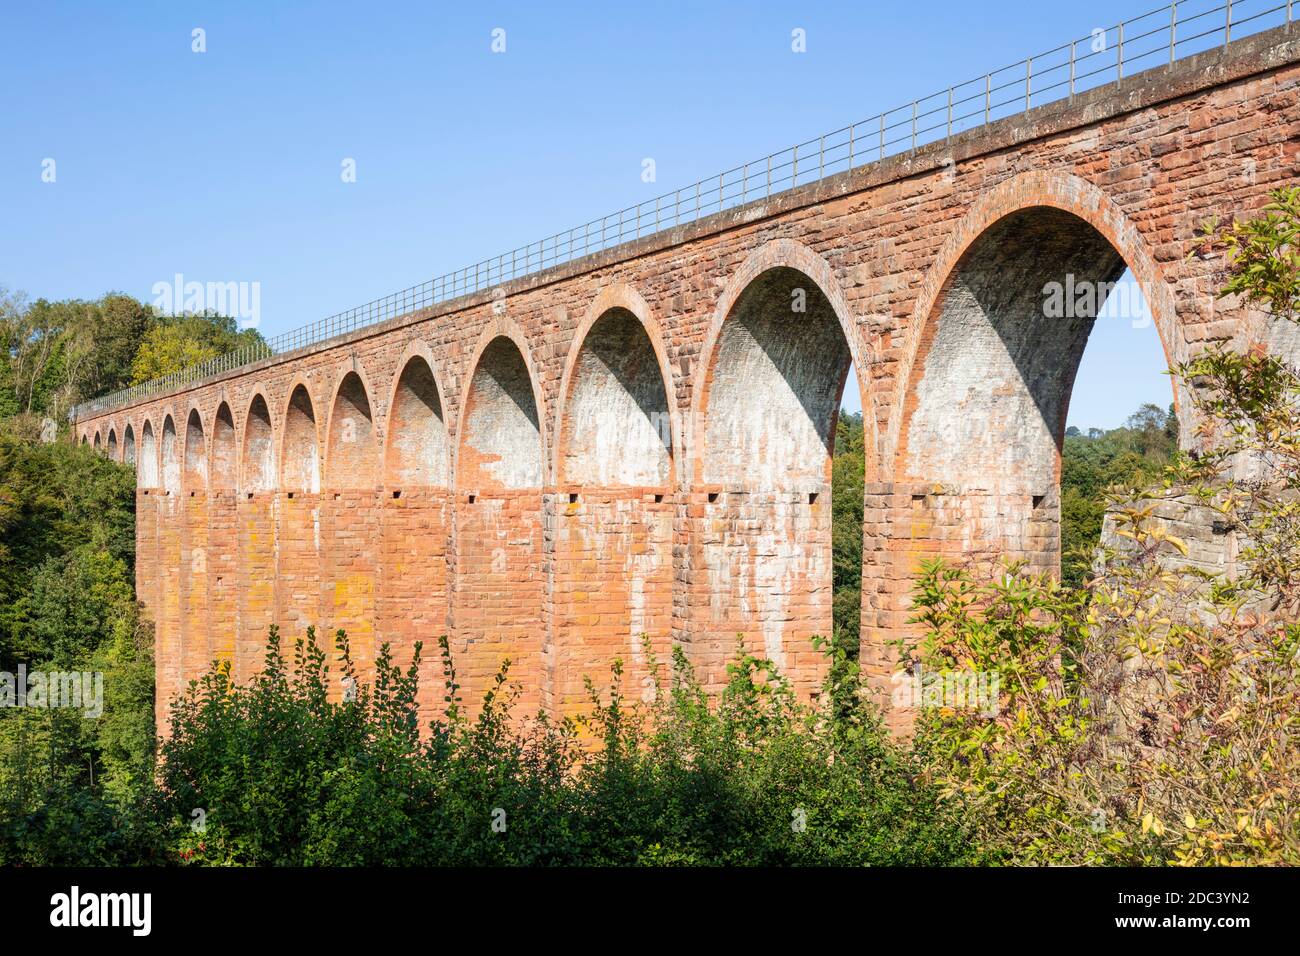 The Leaderfoot Viaduct over River Tweed Ravenswood near Melrose Scottish Borders Scotland UK GB Europe also known as the Drygrange Viaduct Stock Photo